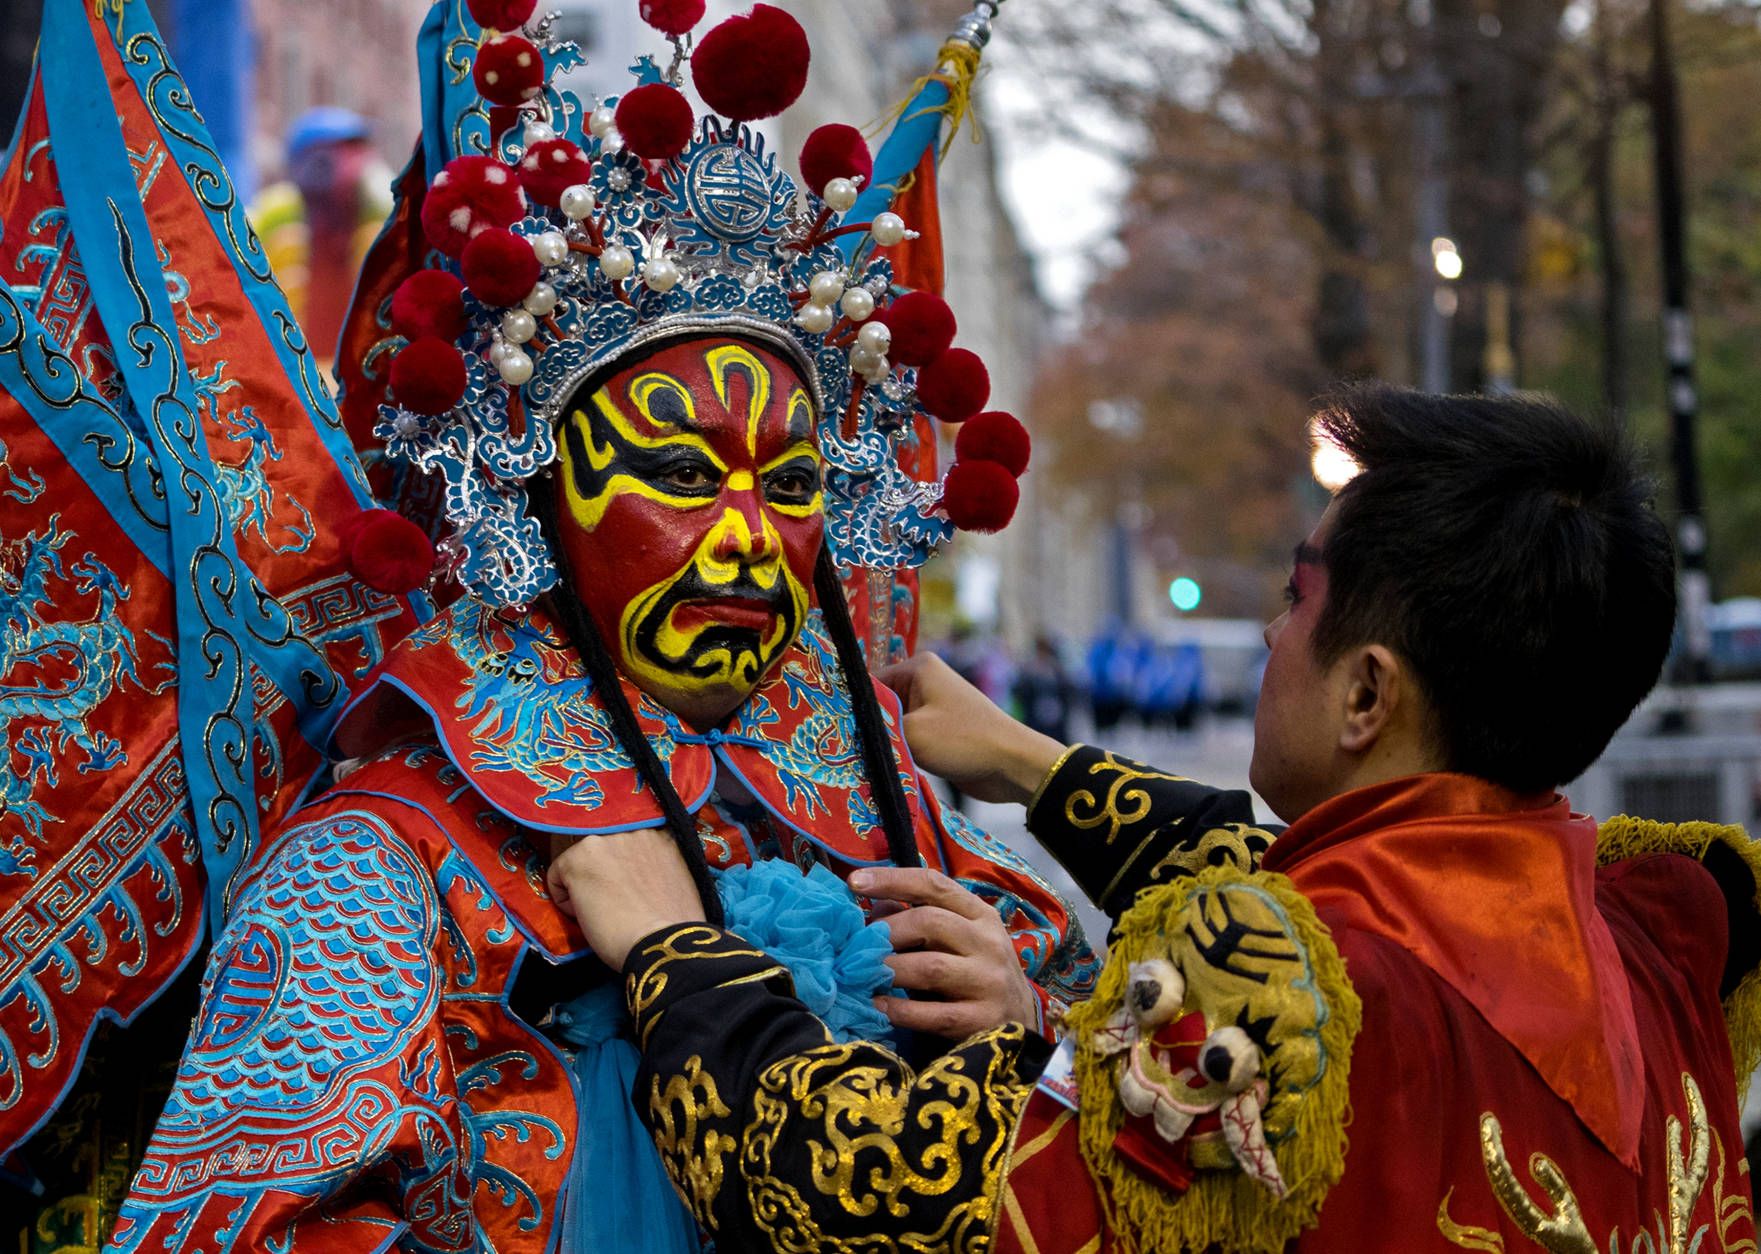 A dancer with the Chengdu (China) Panda float is assisted by a fellow dancer before the start of the Macy's Thanksgiving Day Parade in New York, Thursday, Nov. 24, 2016. (AP Photo/Craig Ruttle)